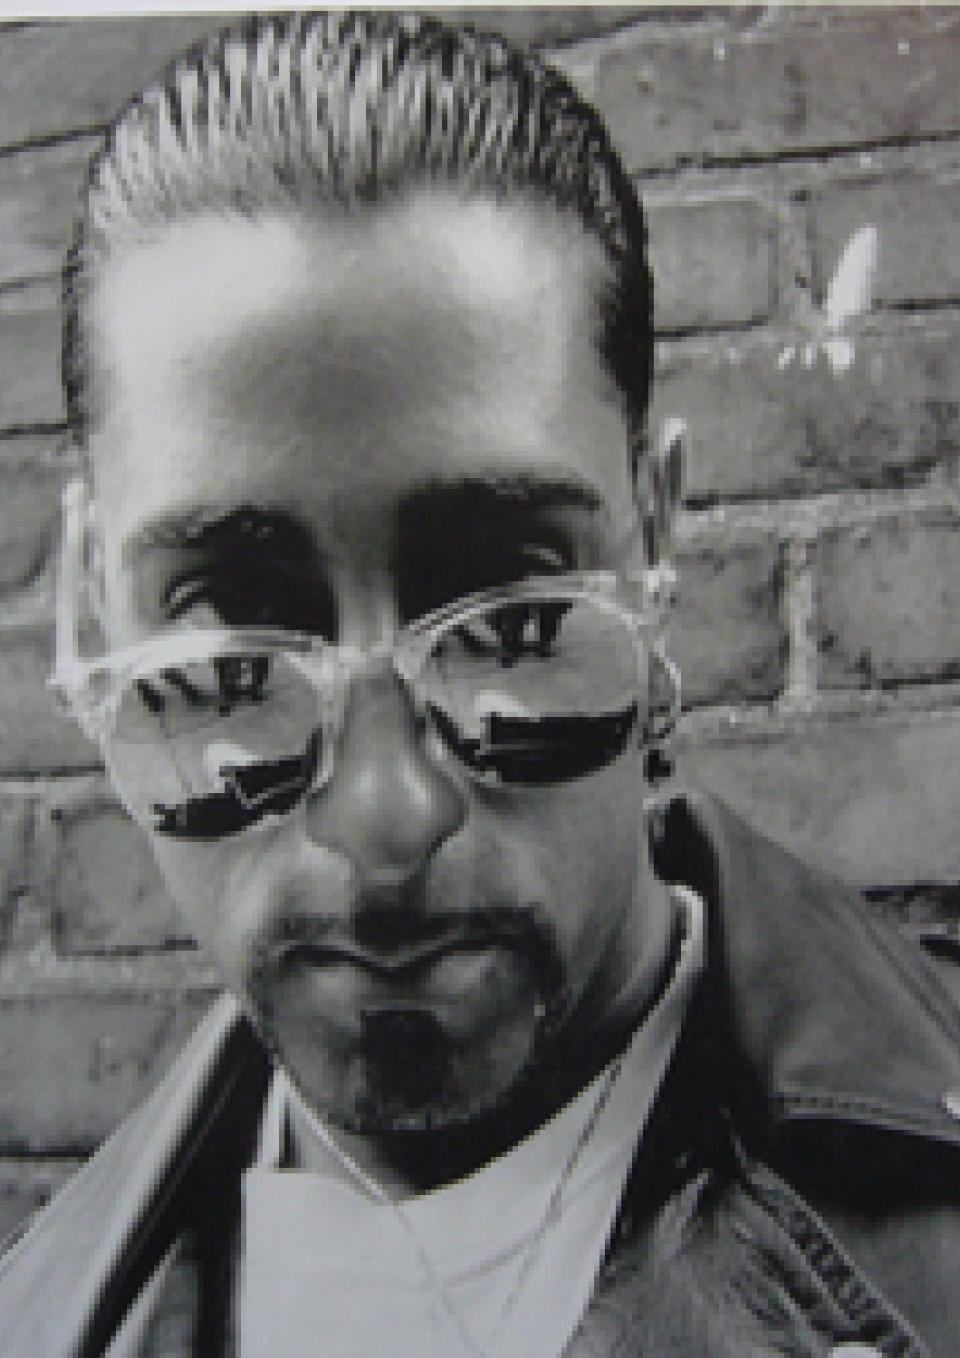 A black and white still from the New Day film Tales from Arab Detroit. A slightly low angle shot of a man with slicked back hair and a leather jacket standing in front of a brick wall. He is looking into the camera, pressing his lips together. He wears sunglasses pushed down on his nose making his eyes partially visible as well as one earring and a necklace.